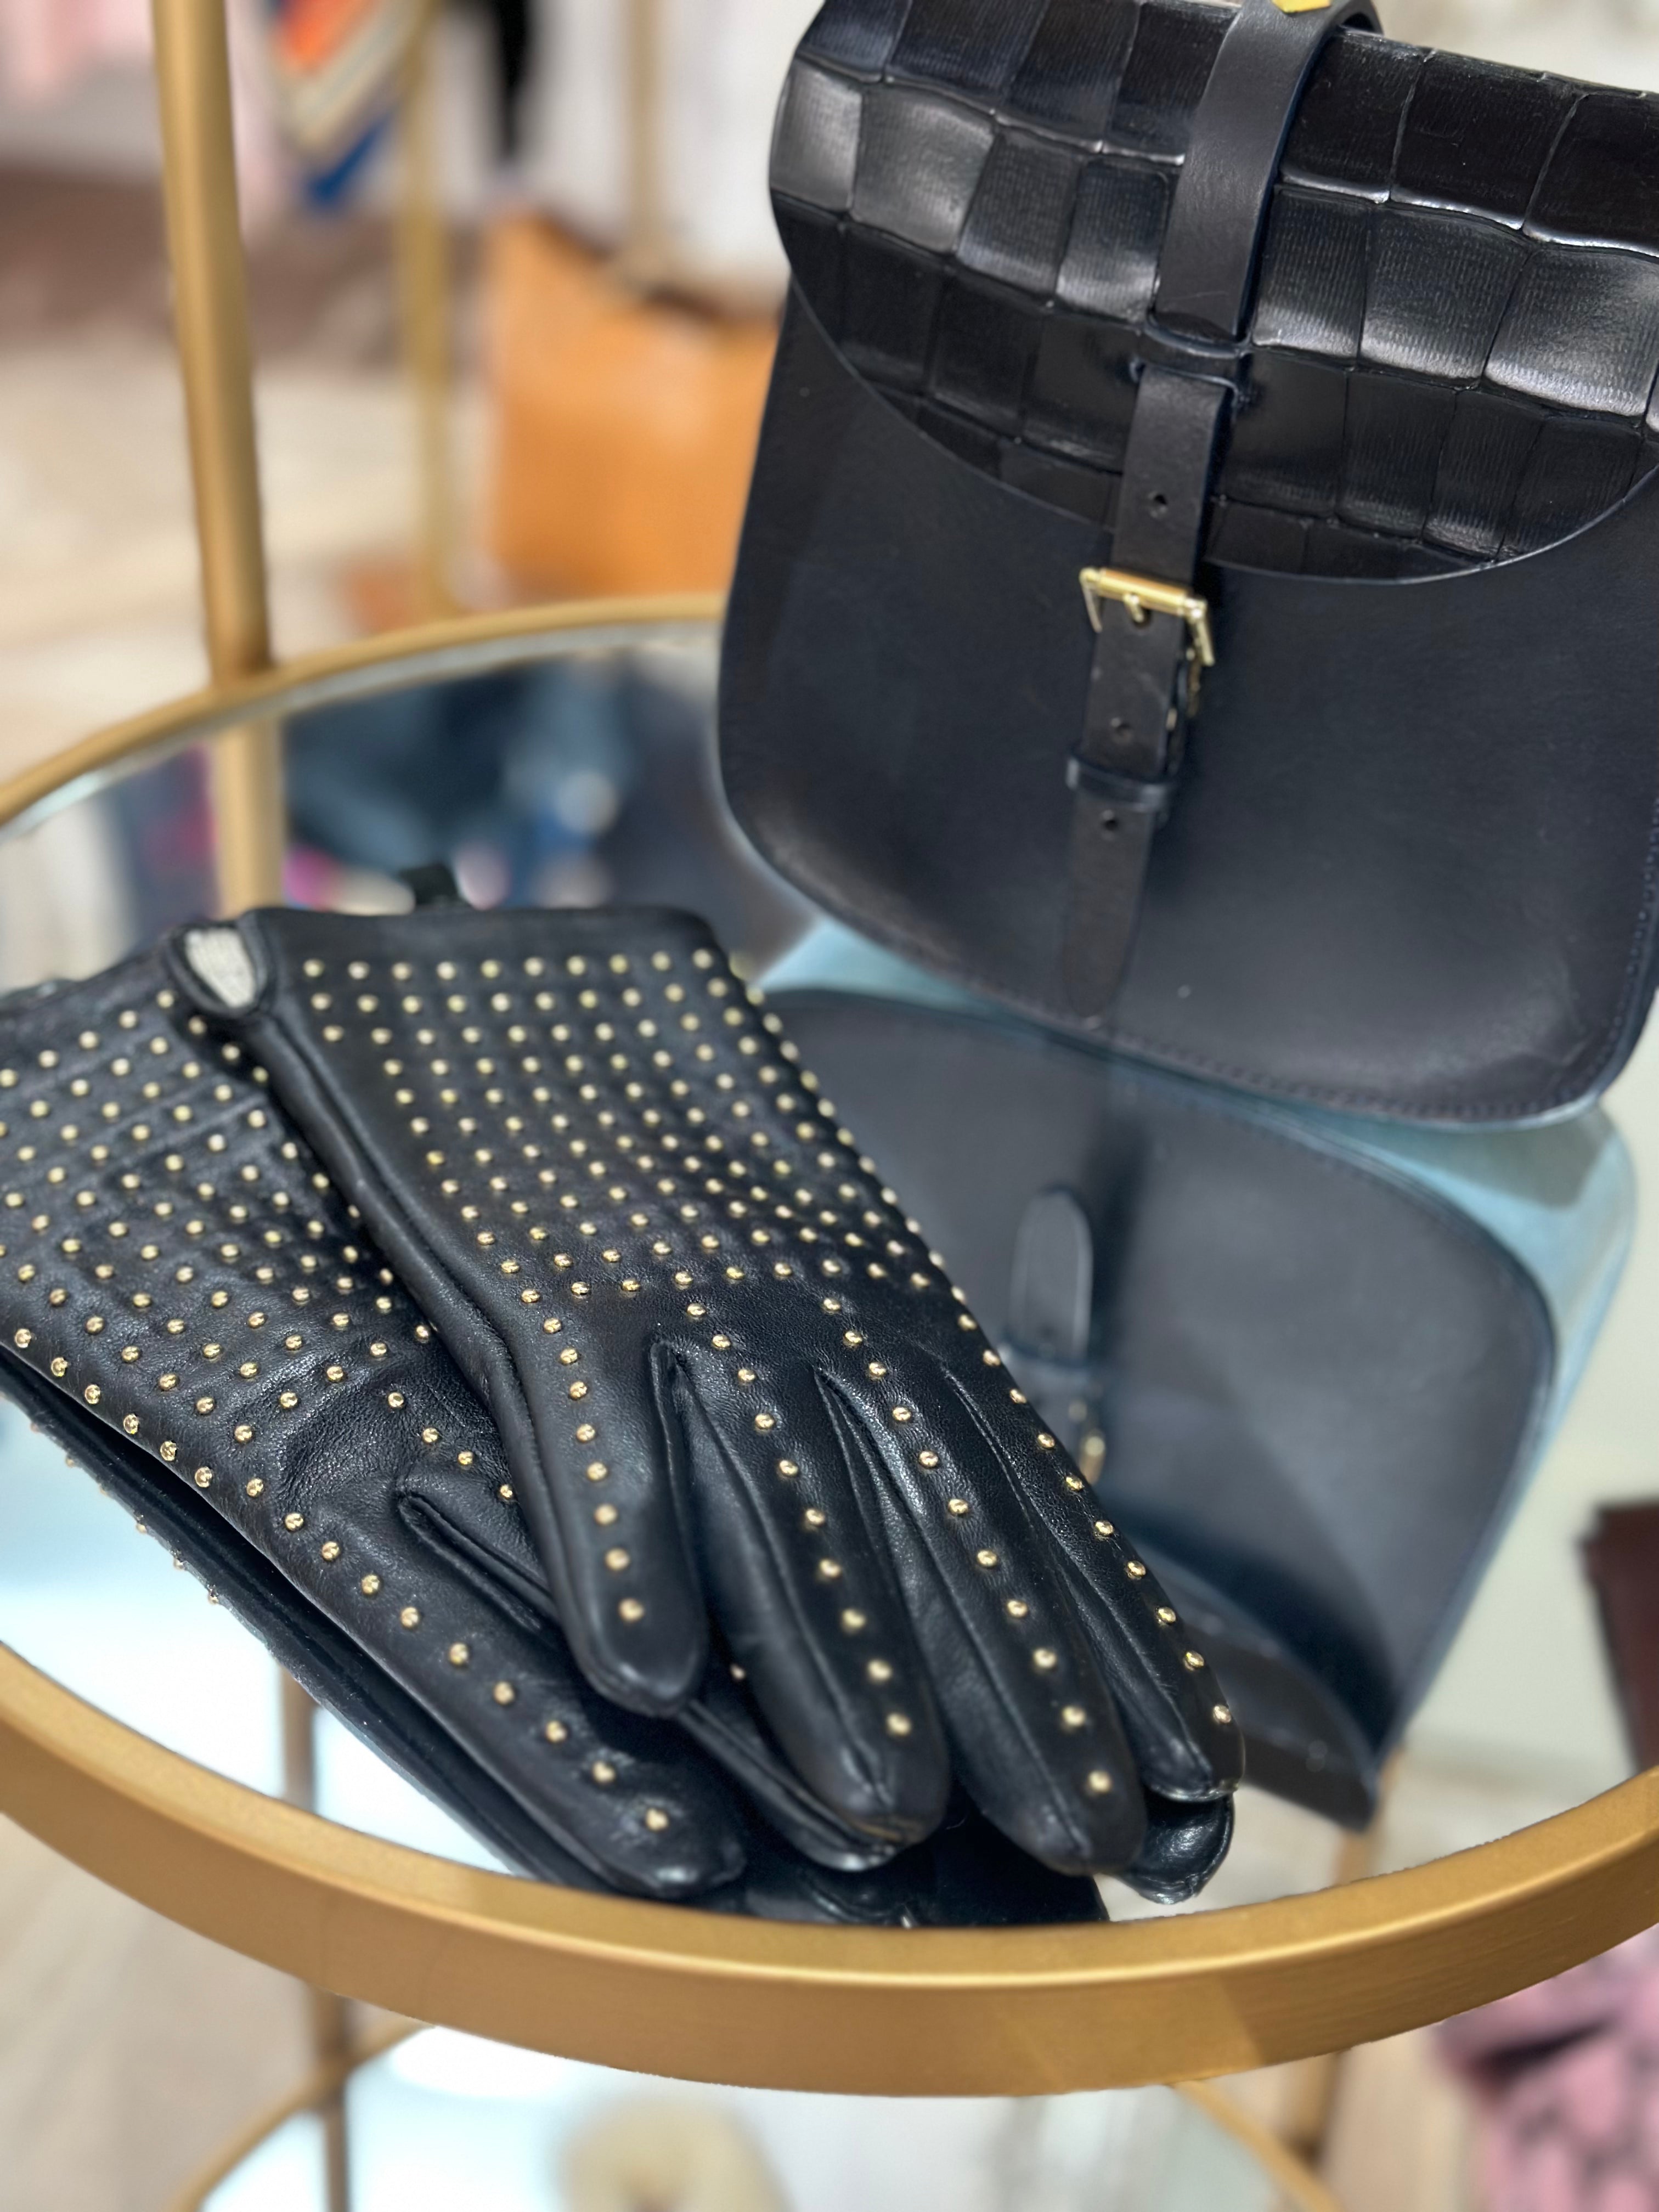 Black Leather Gloves with Gold Stud Detail